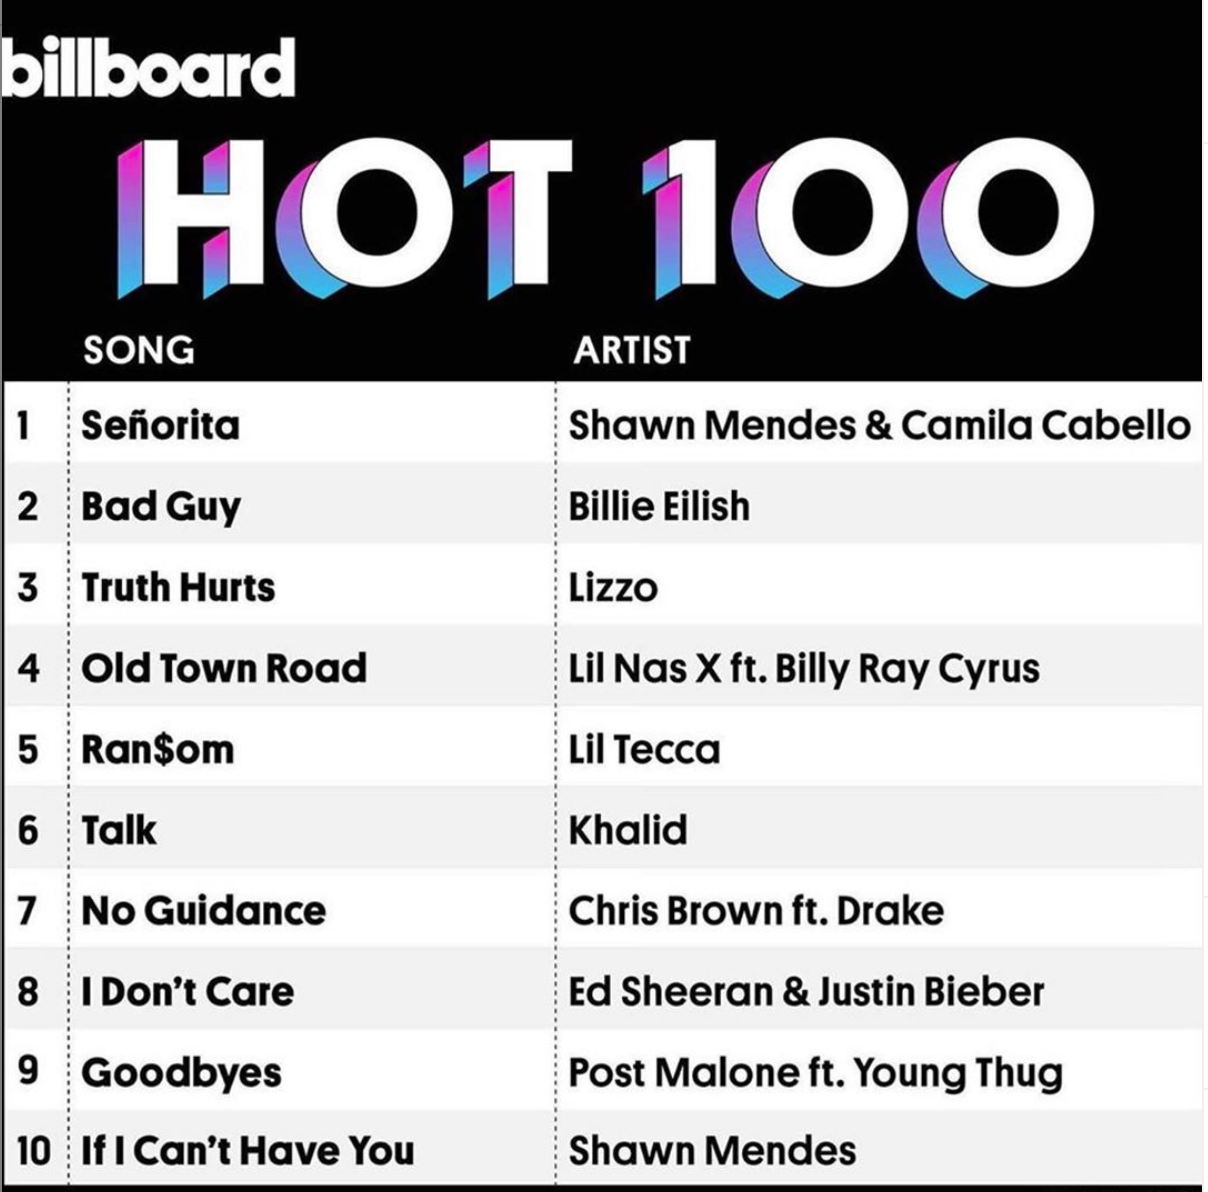 Billboard Hot 100 Featuring Andrew Watt in #1 with "Señorita" and Nija Charles at #7 with "No Guidance"